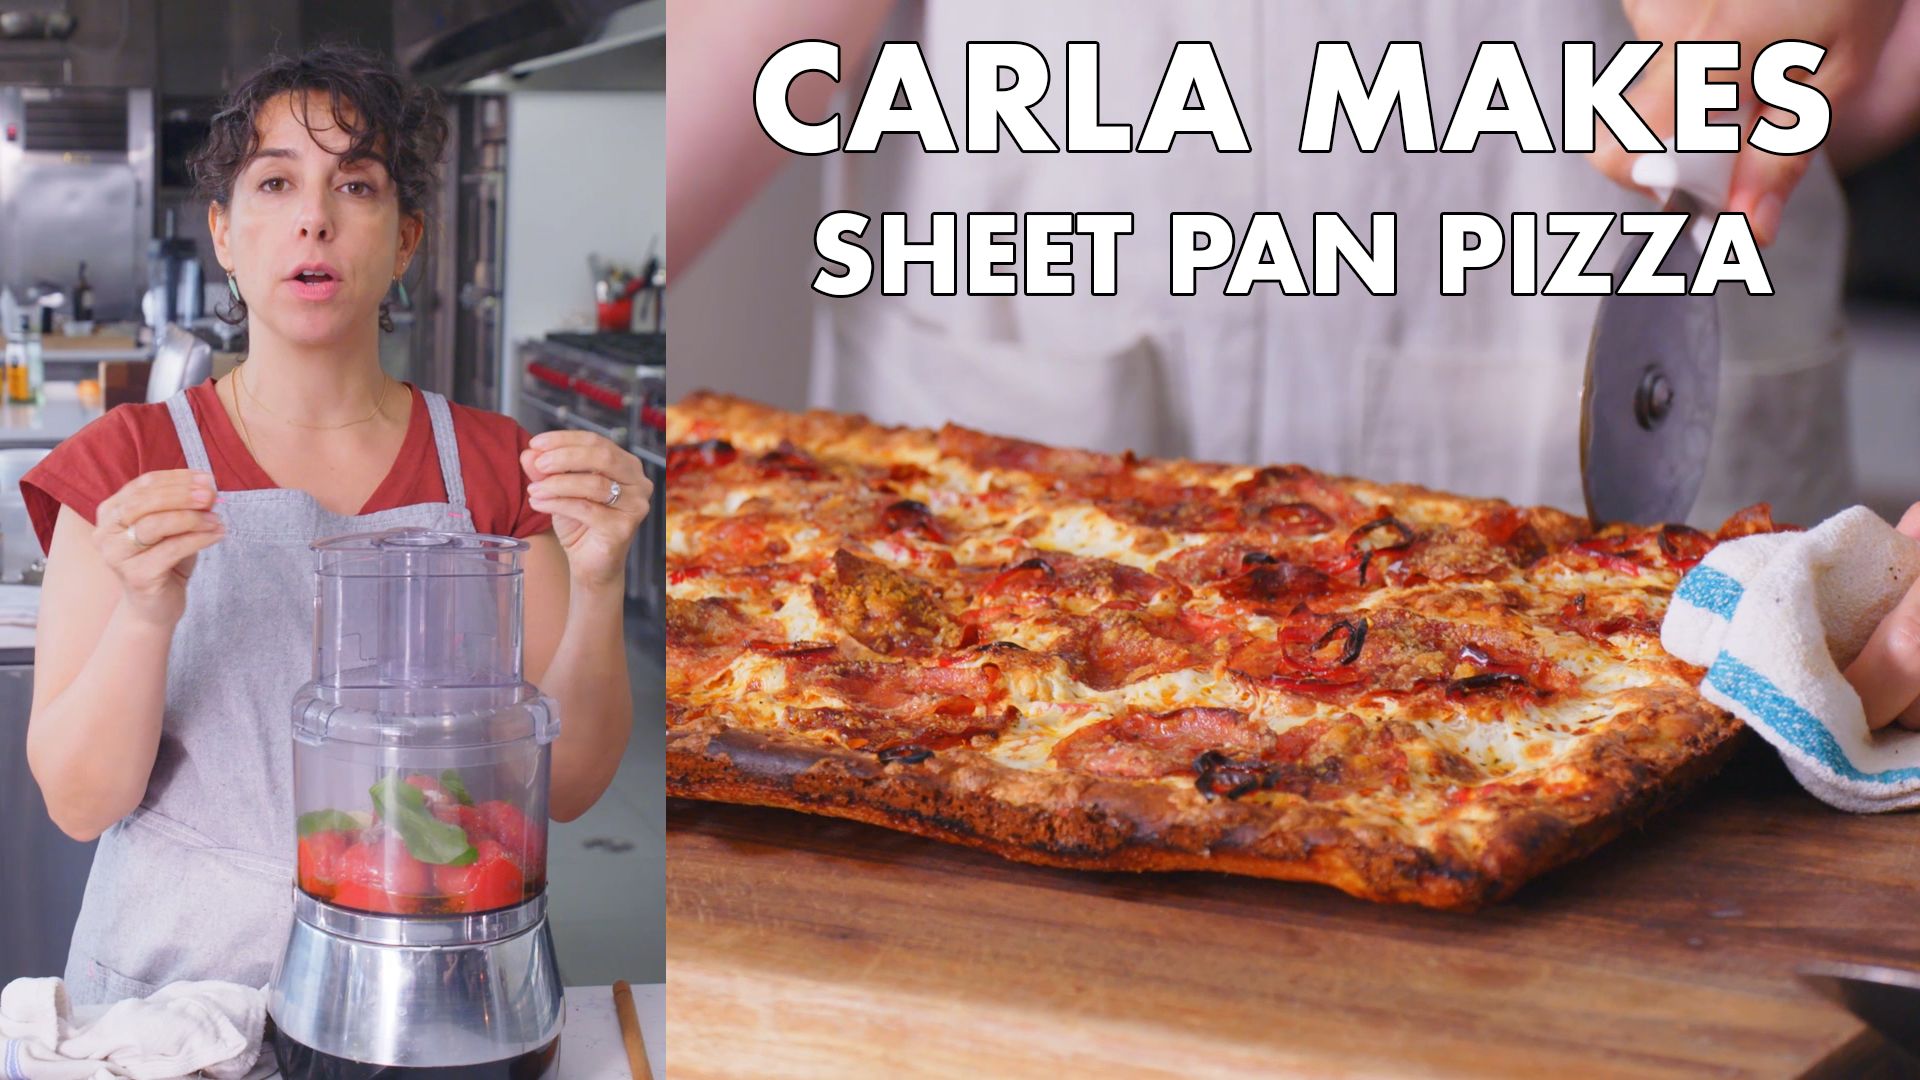 Watch Carla Makes Sheet Pan Pizza, From the Test Kitchen